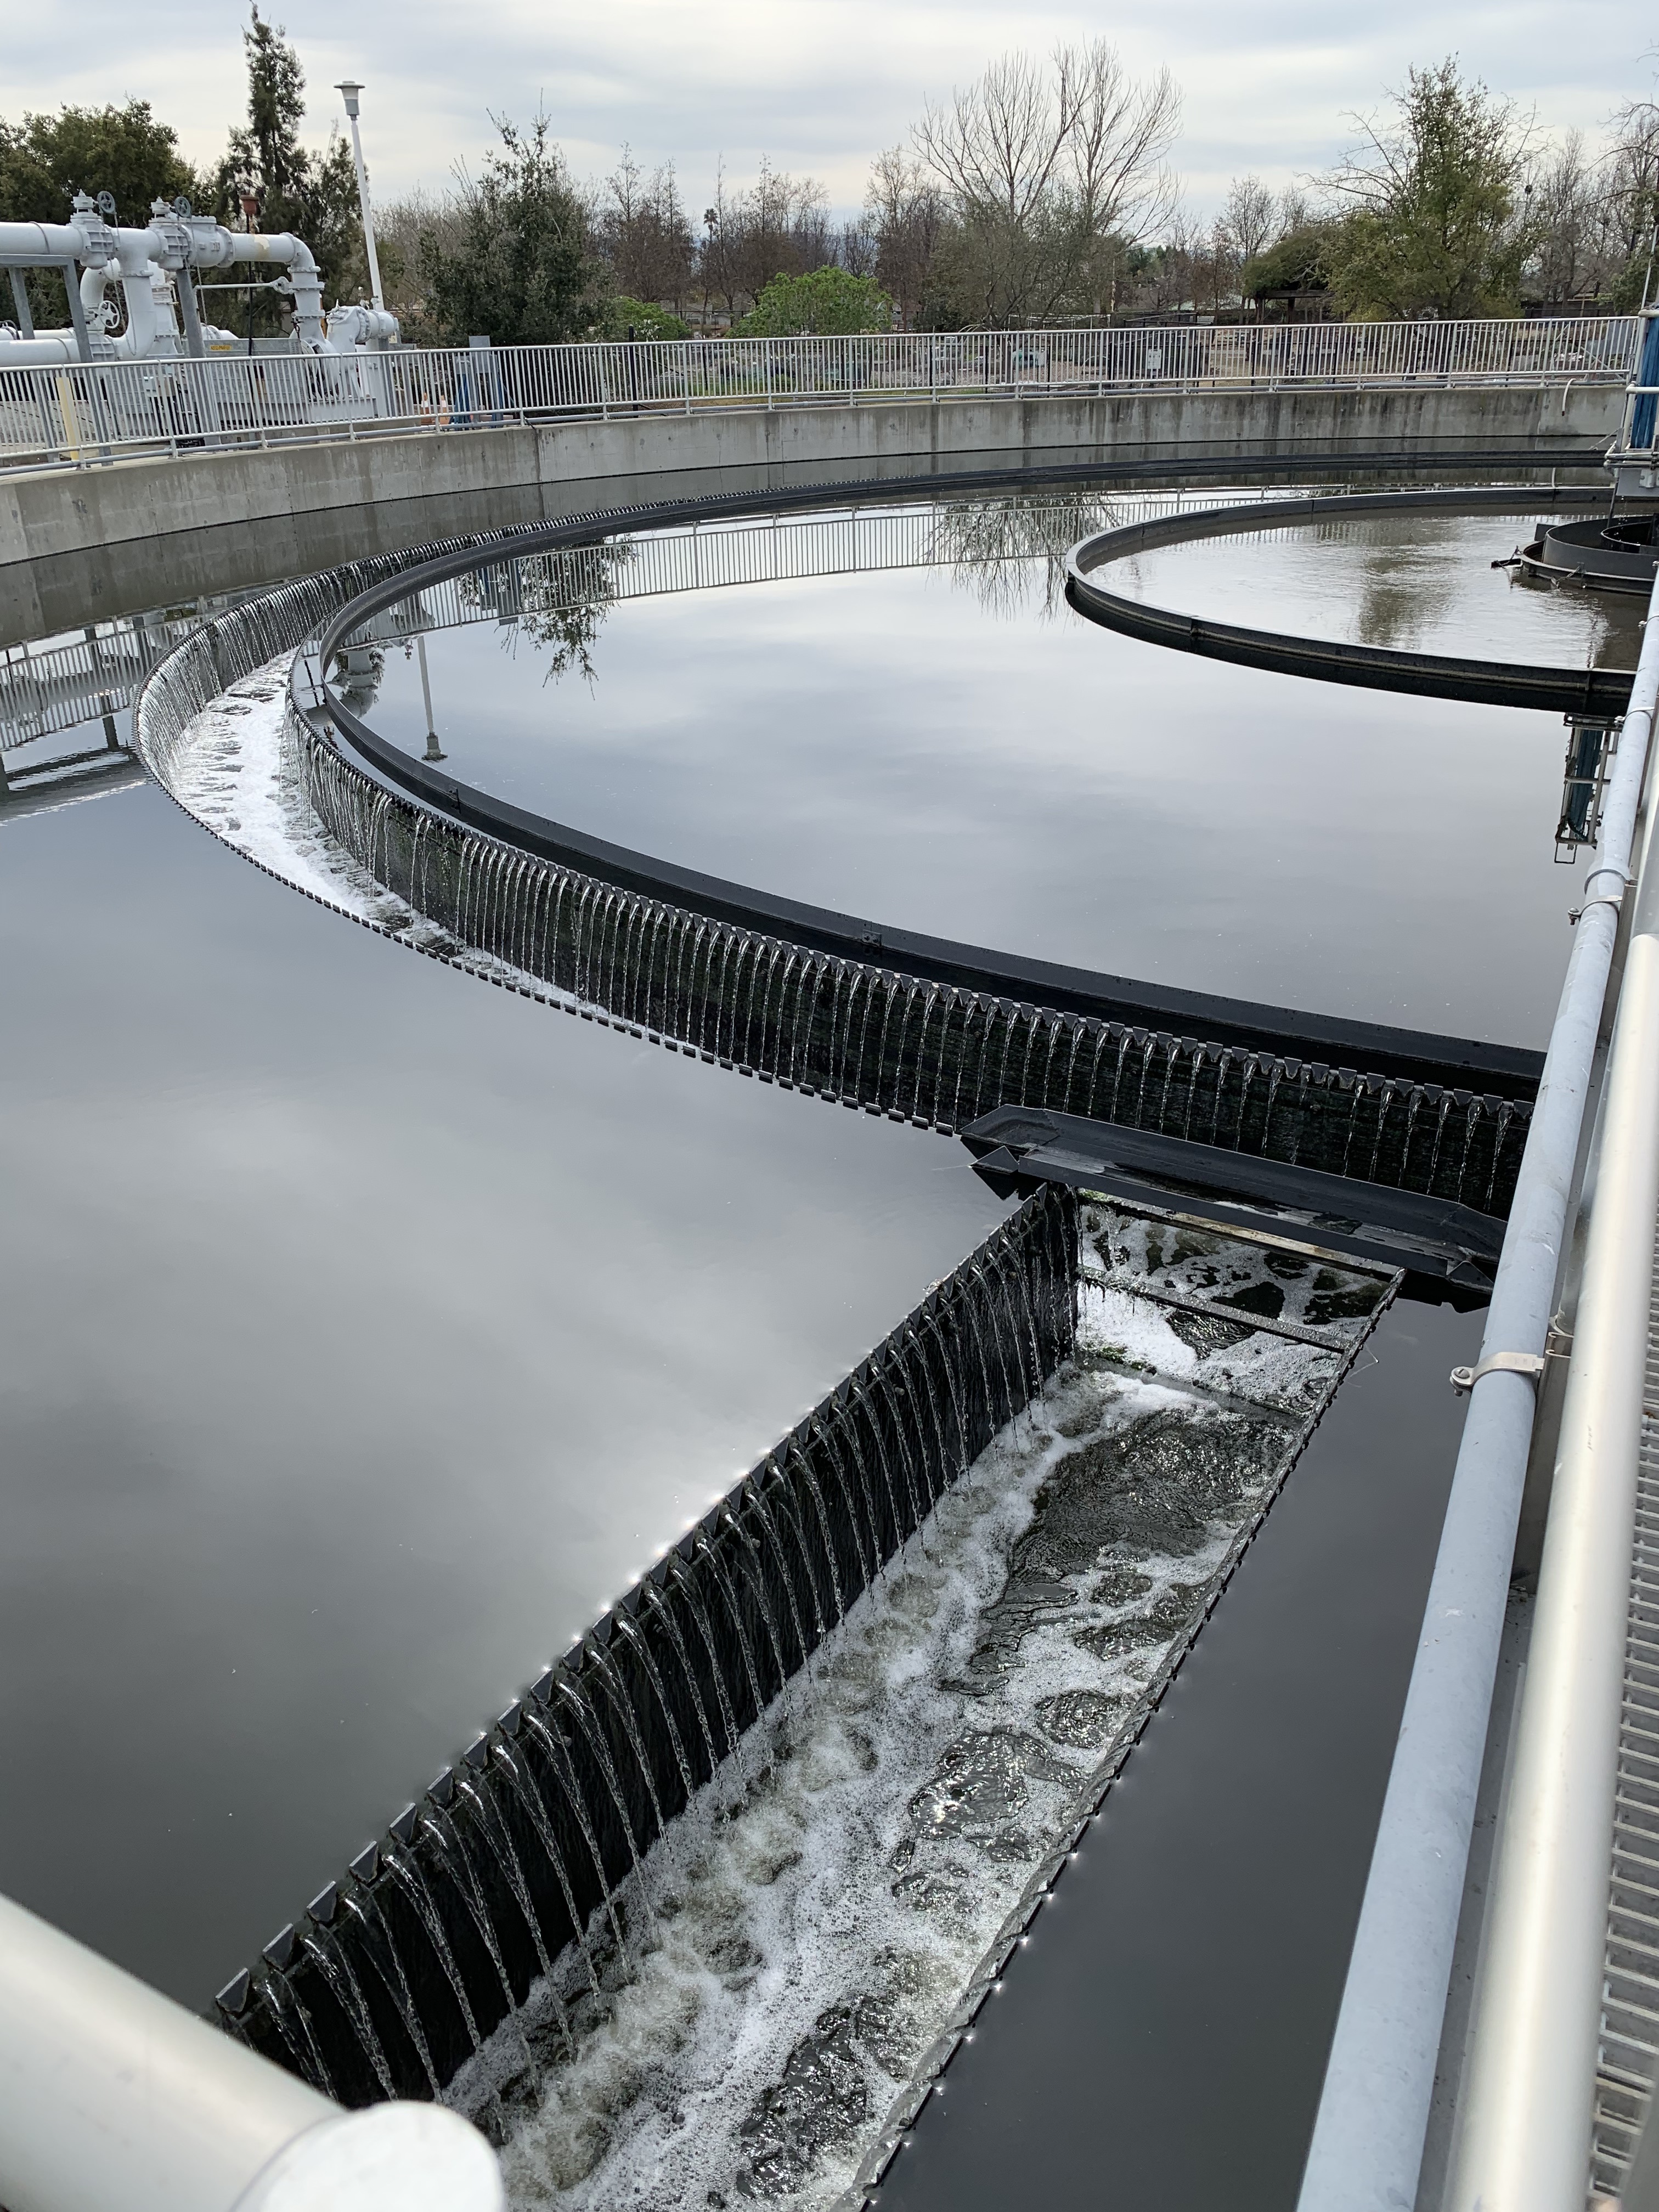 Clarifier at a wastewater treatment plant